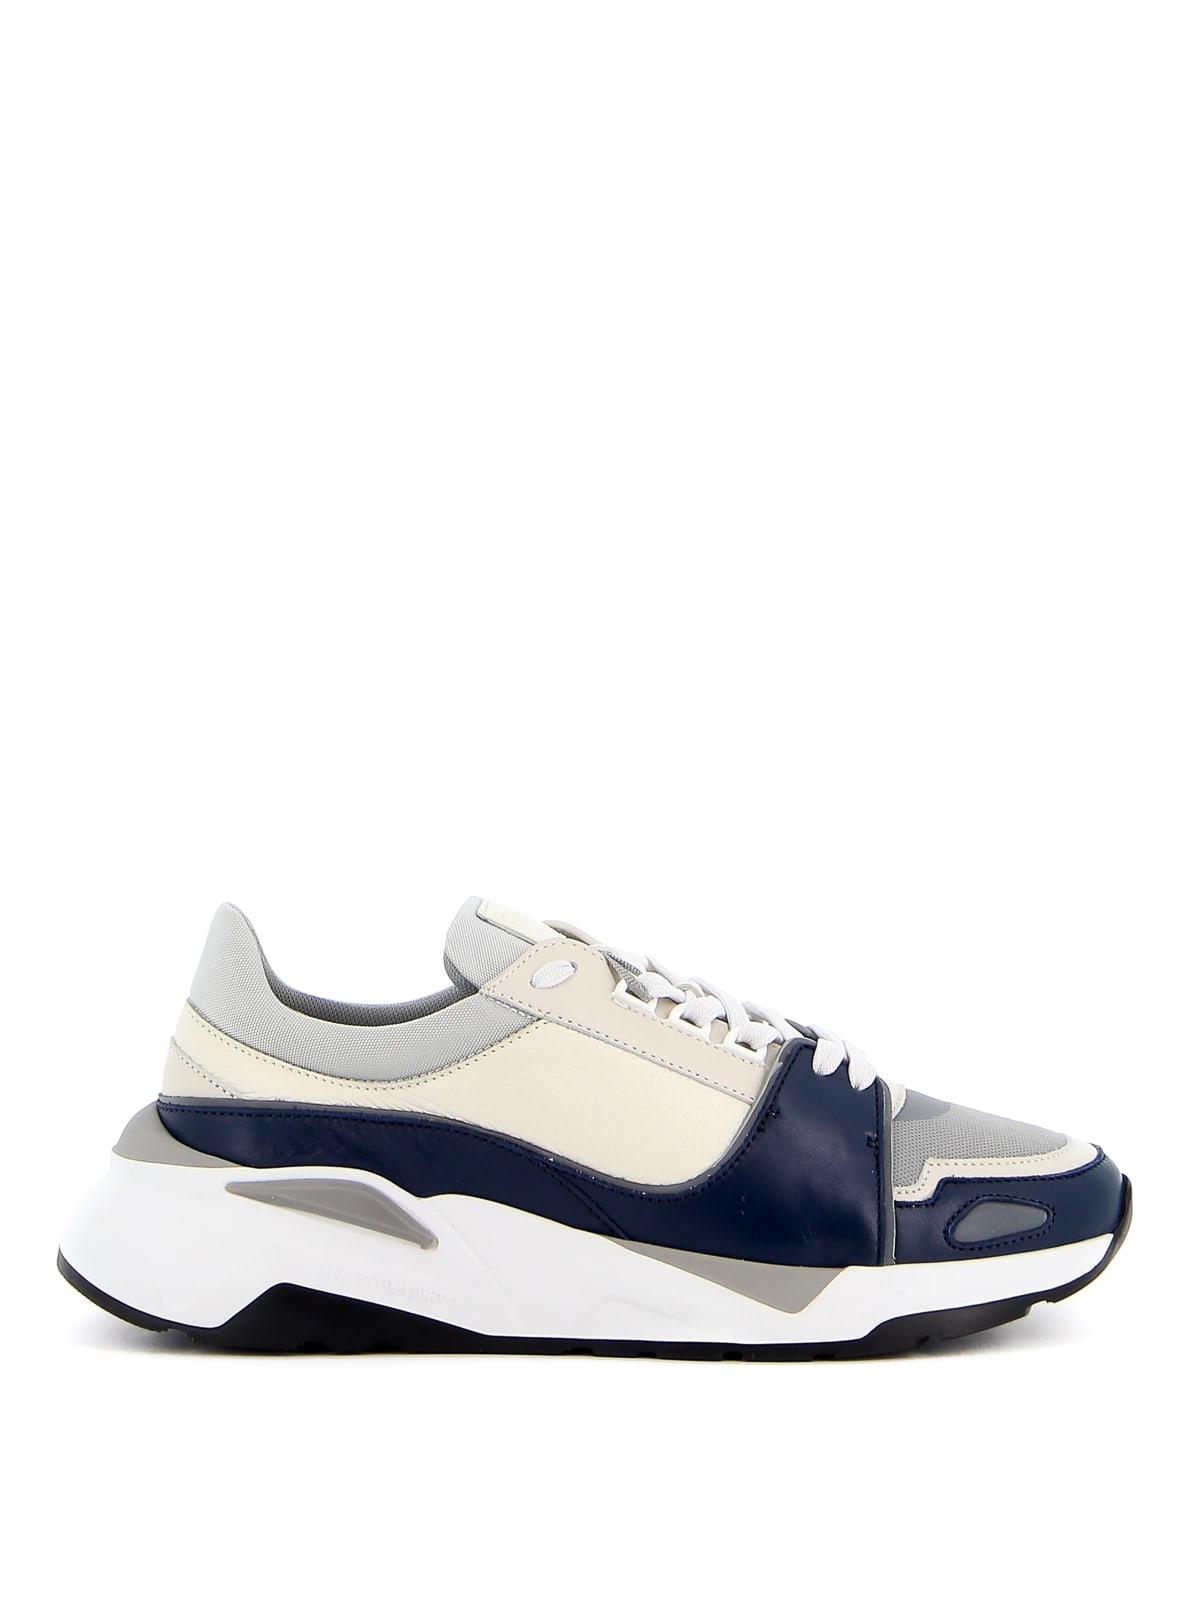 CANALI SNEAKERS,RY00530.191215 310 BLUE